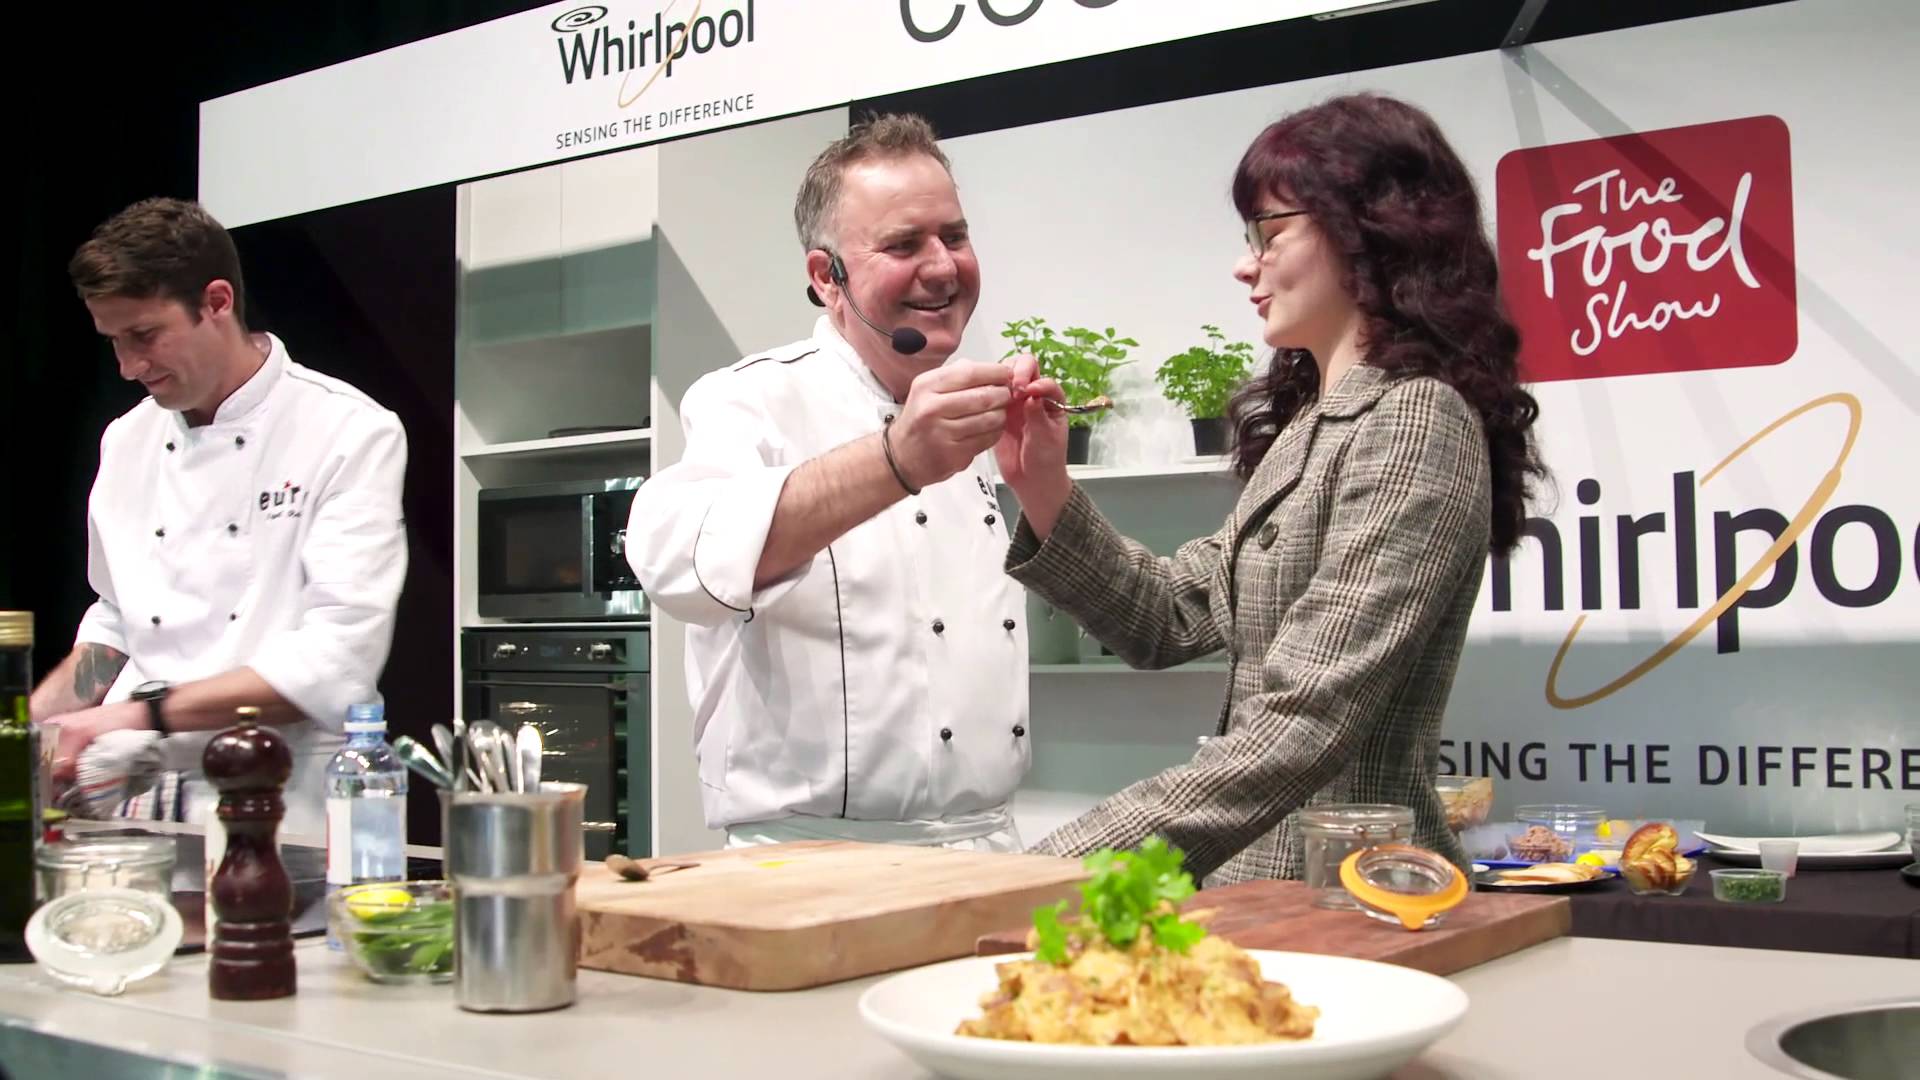 Simon Gault in action in the Cooking Theatre at The Food Show Auckland, one of the many celebrity chefs in attendance this weekend. Find out who else will be appearing here. Image via The Food Show | win two tickets to The Food Show Auckland | onetakekate.com